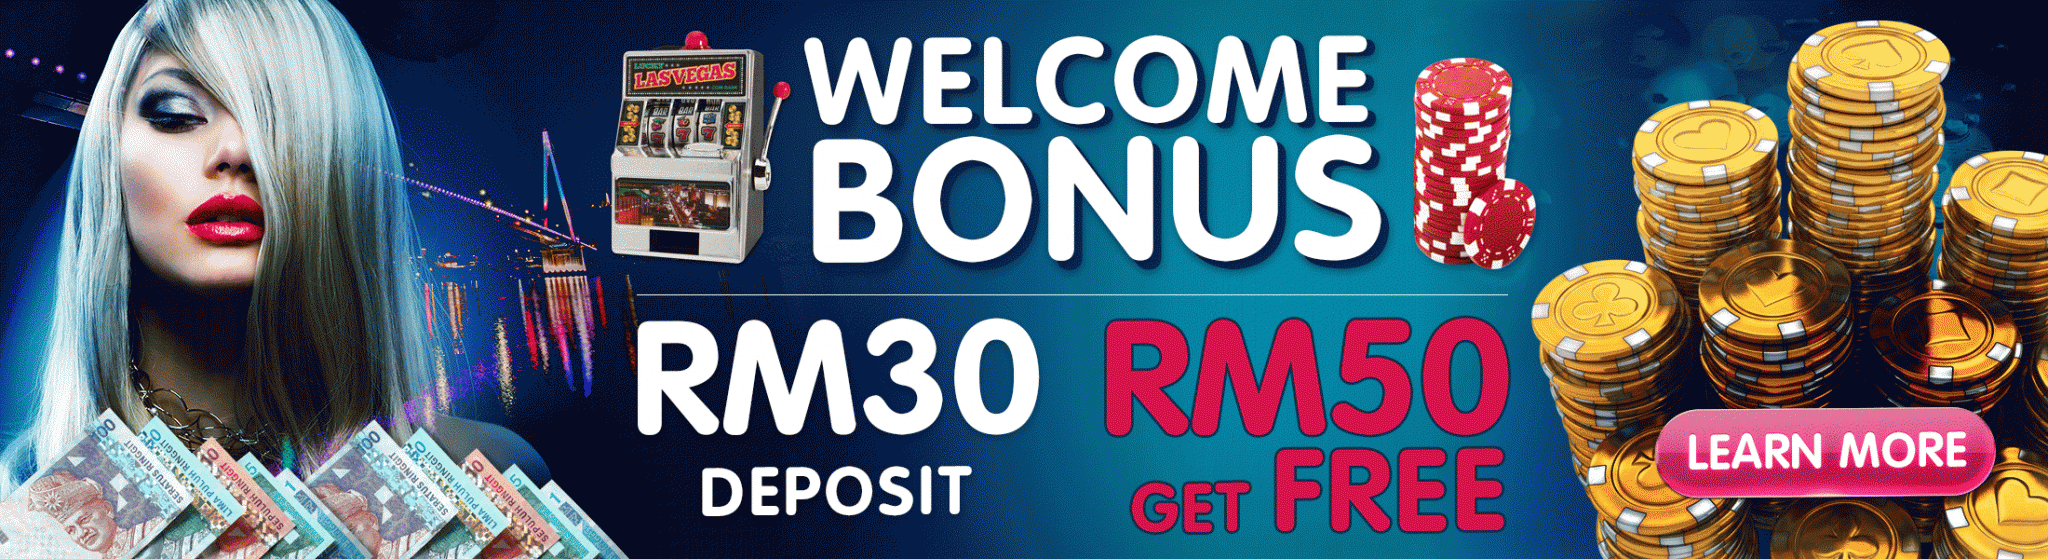 SCR888 Give Slot Game Welcome Bonus Monthly Deposit RM 30 Free RM 50